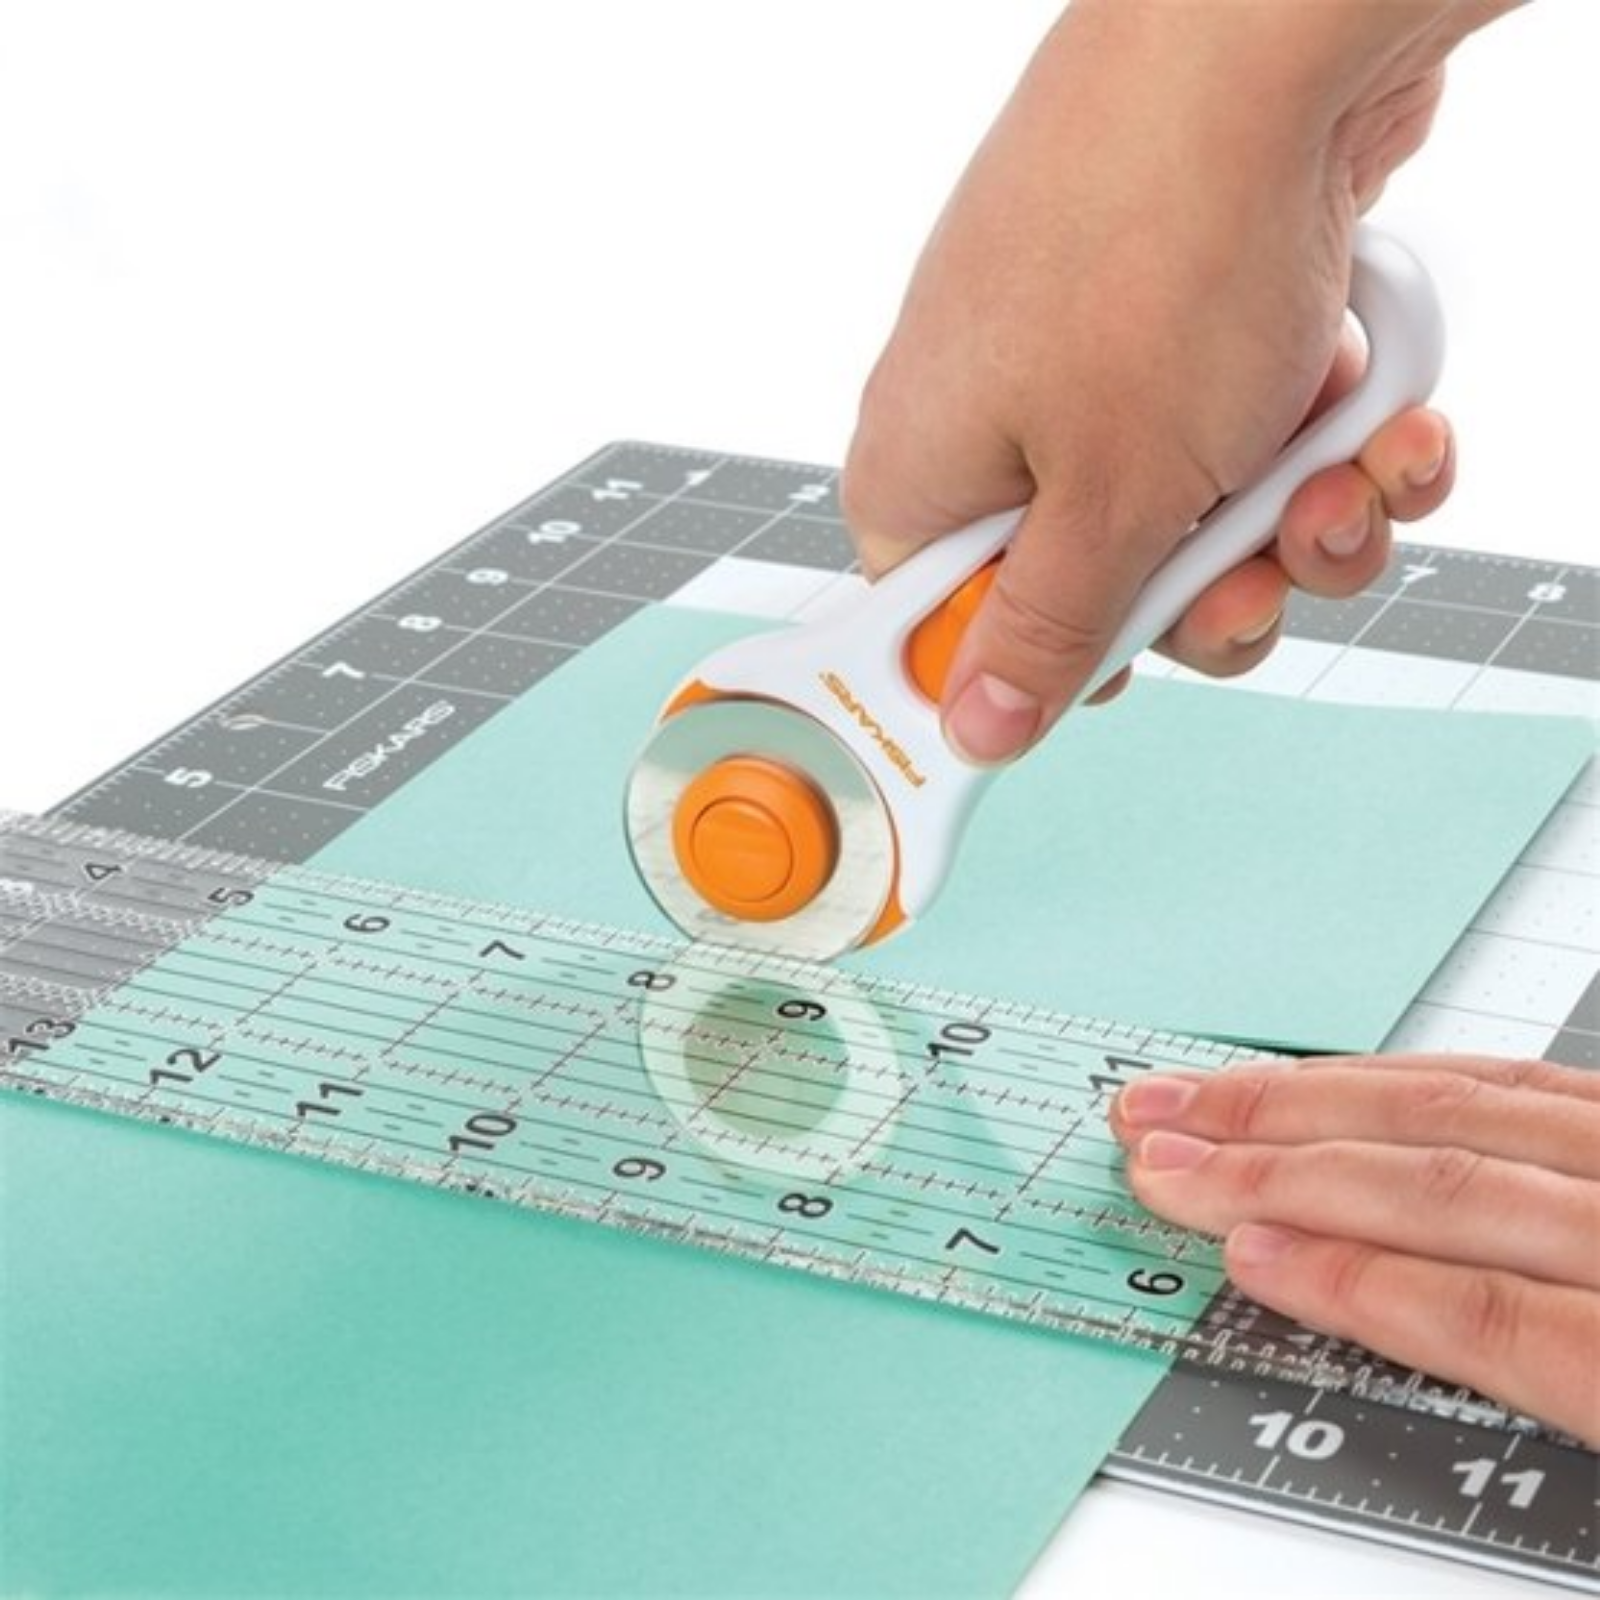 Fiskars Rotary Paper Edger, 45mm Blade, Heavy-Duty, Premium Steel - Works with a straight or decorative edge blades